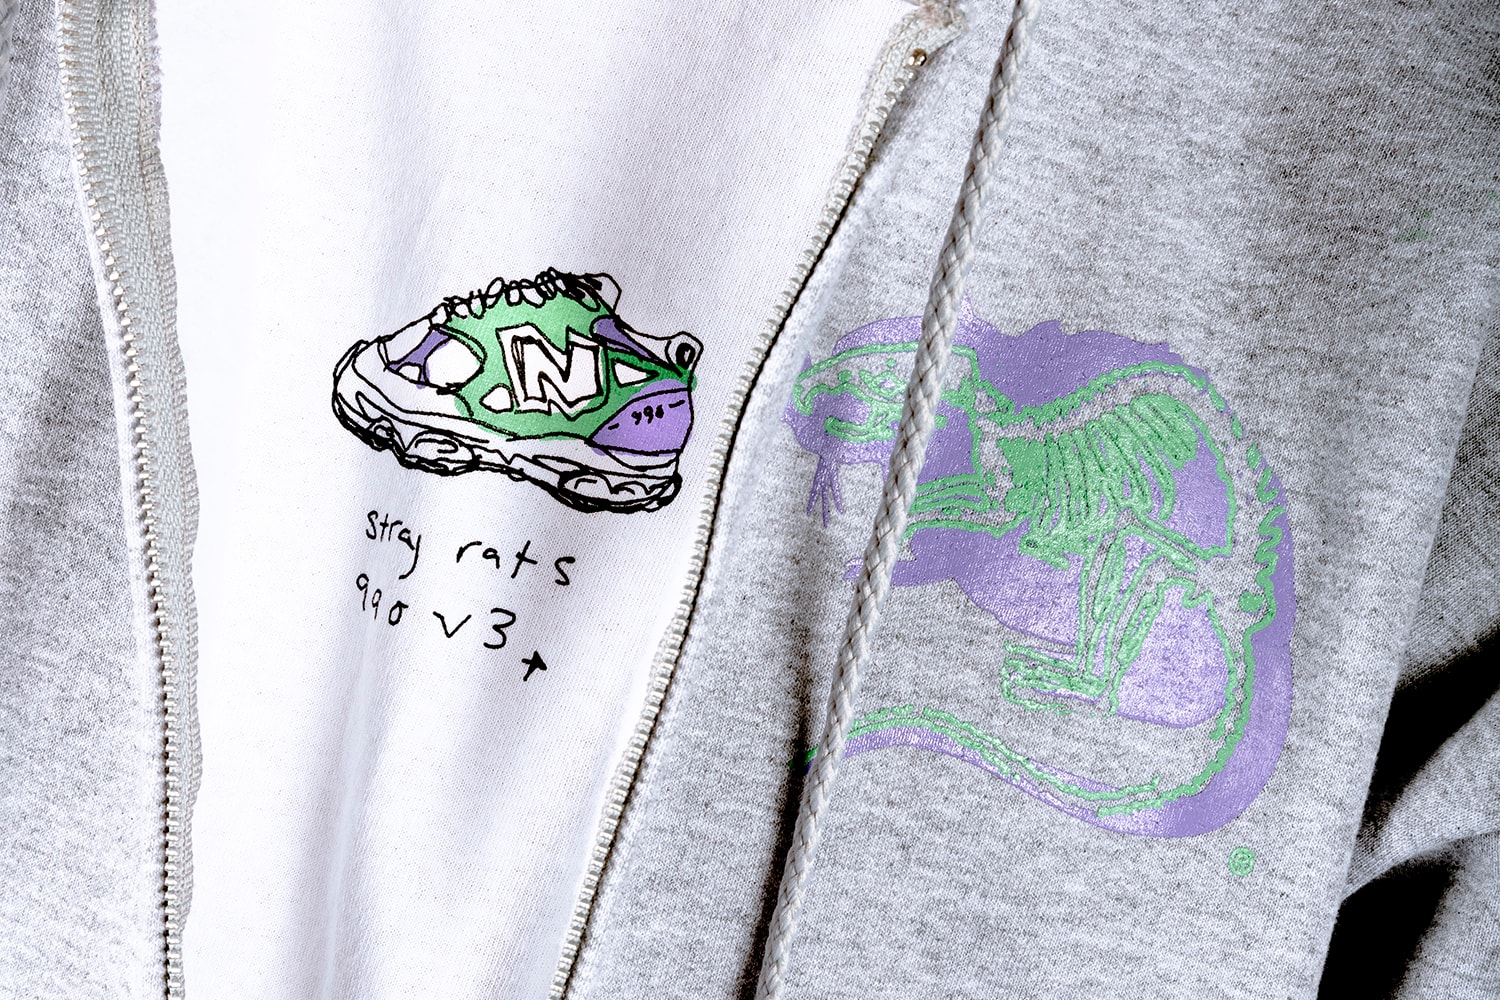 Stray Rats x New Balance 990v3 Second Collaboration sneaker drop release date info colorway joker inspiration may 2019 miami "Alternate 2" 18